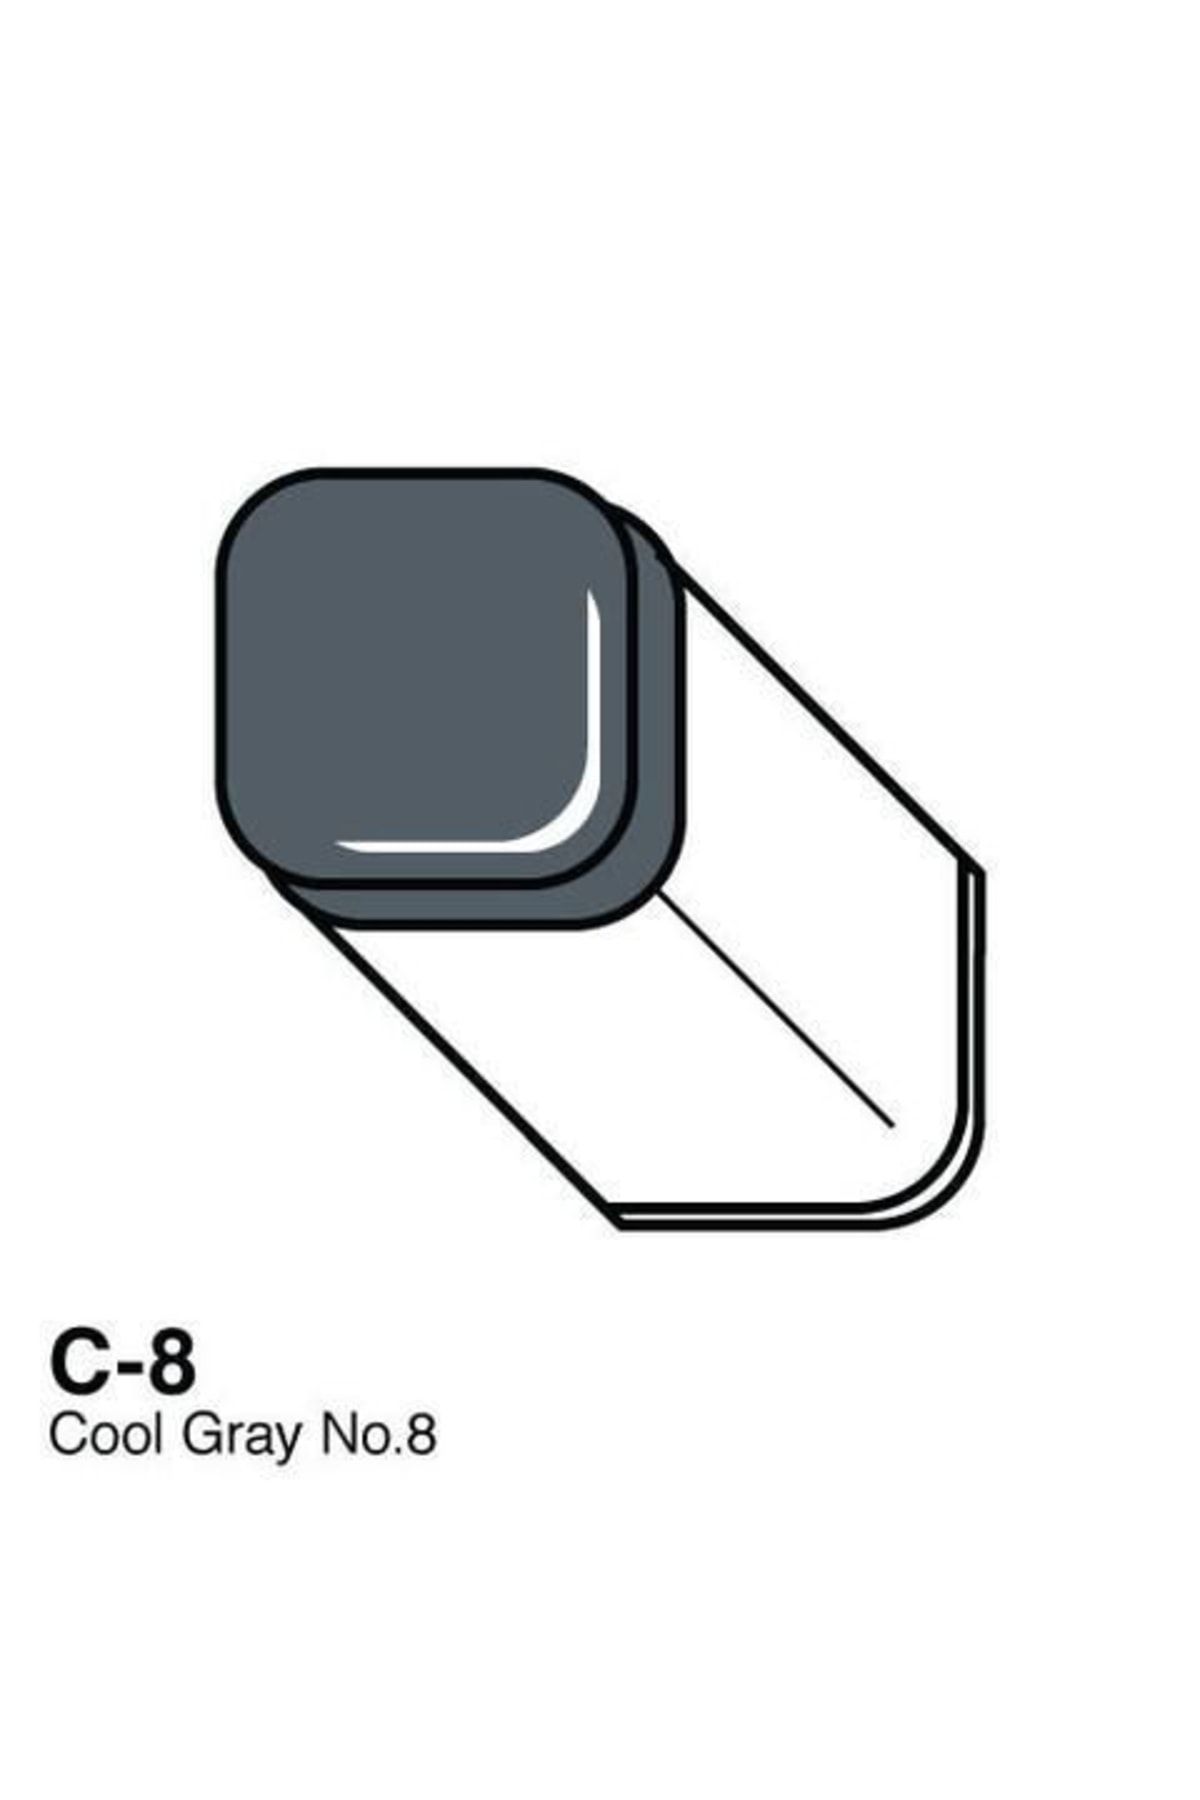 copic Classic Marker N:C8 Cool Gray